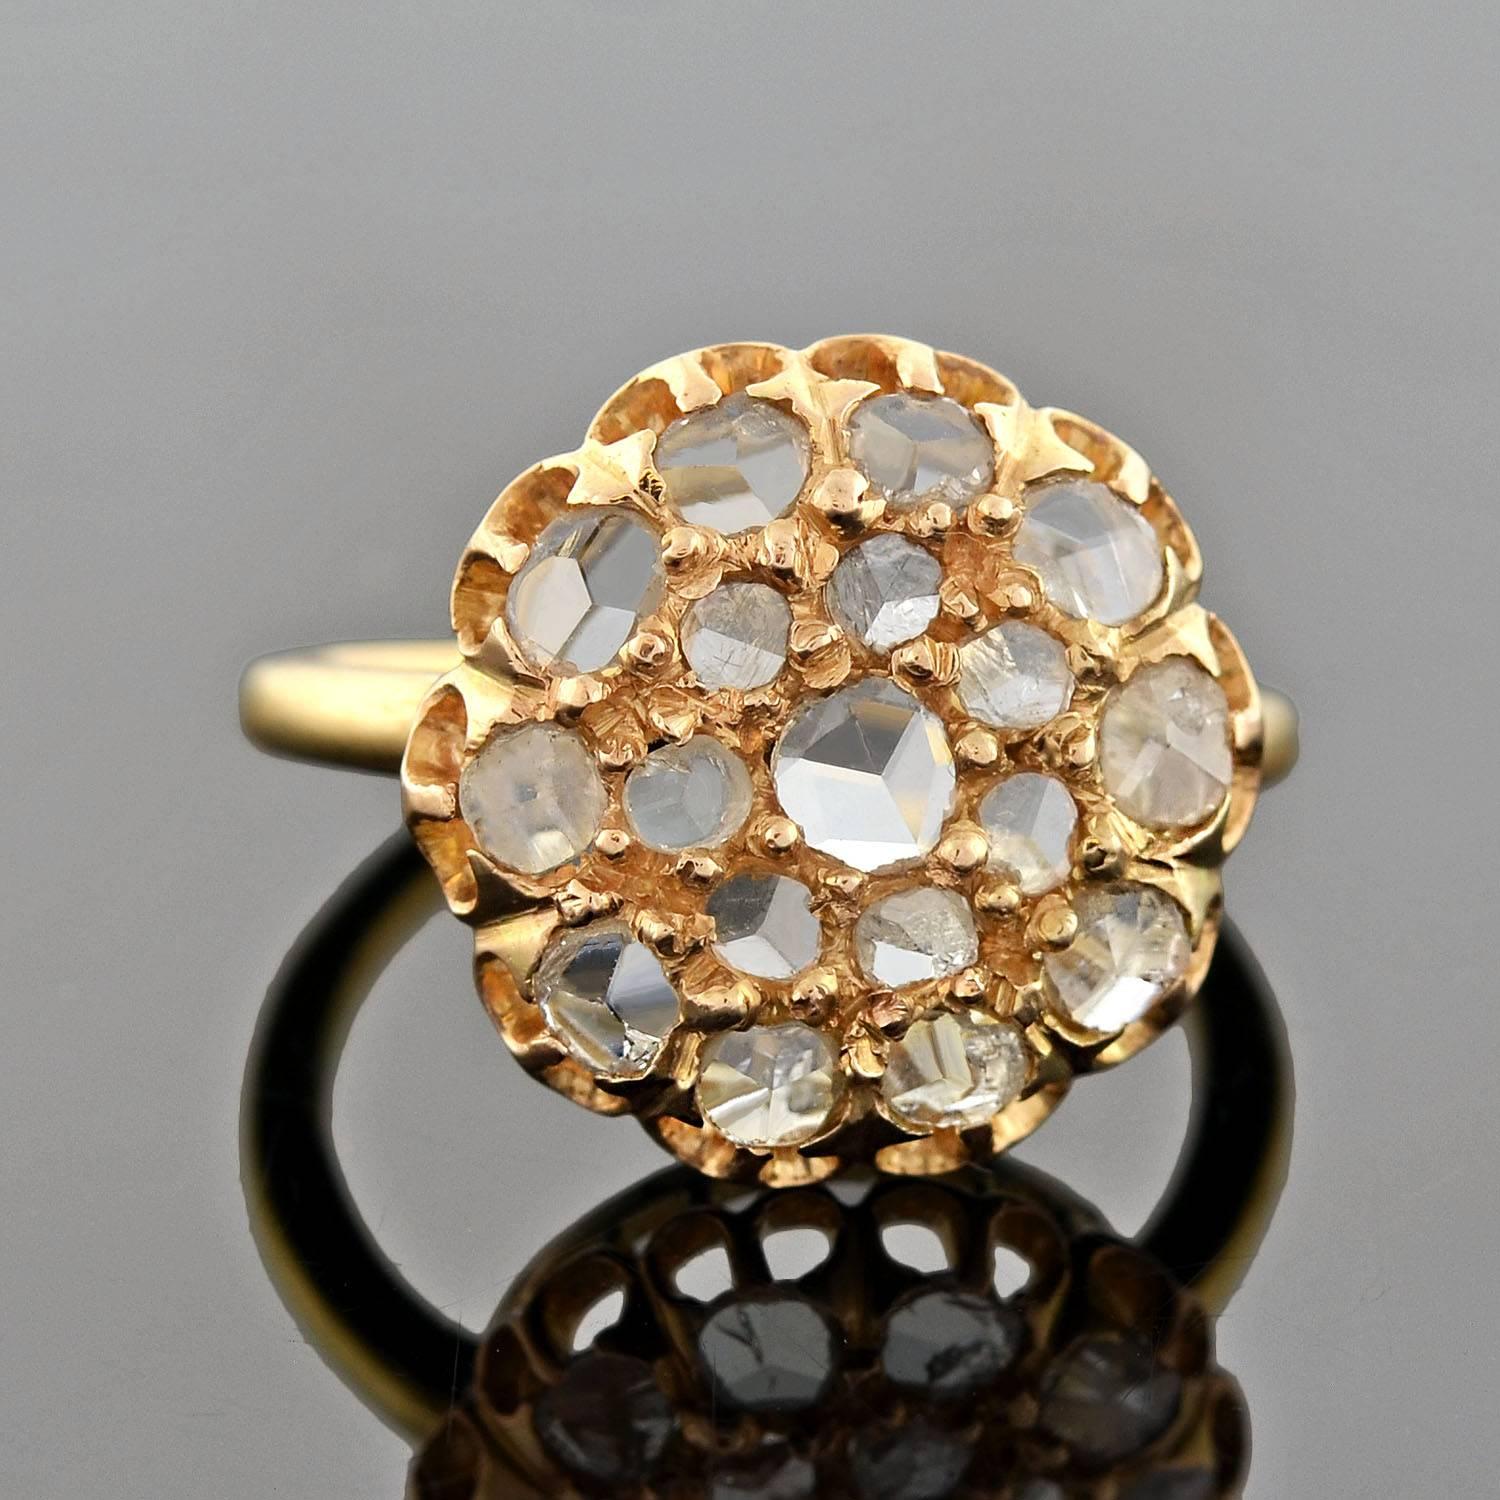 A spectacular rose cut diamond ring from the late Victorian (ca1900) era! This incredible ring features a beautiful cluster of sparkling old Rose Cut diamonds resting in a circular 18kt gold setting. The diamonds vary in size and are hand set in two